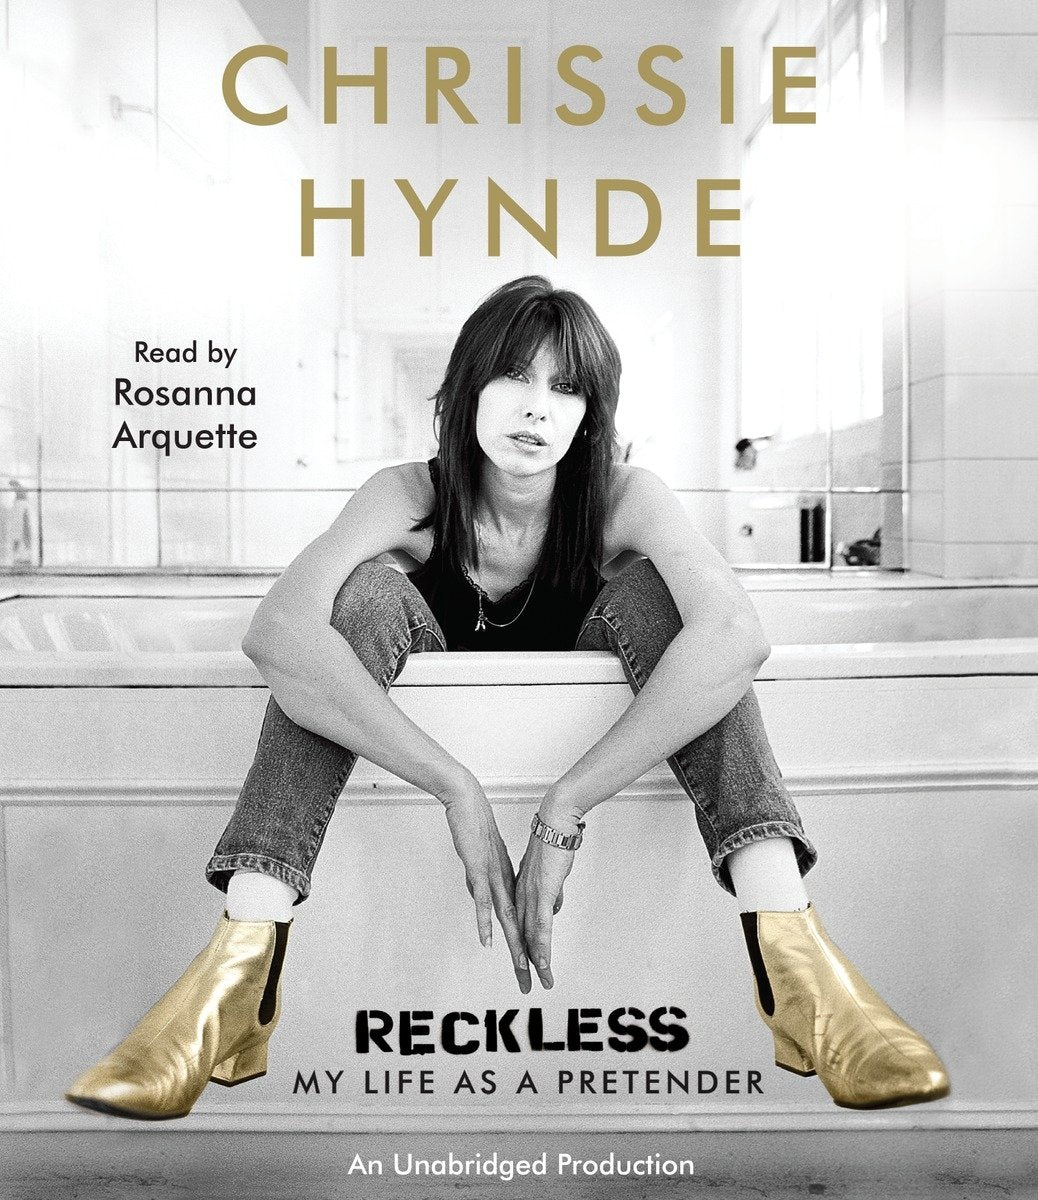 Chrissie Hynde - Reckless My Life As A Pretender - AUDIOBOOK 8CD